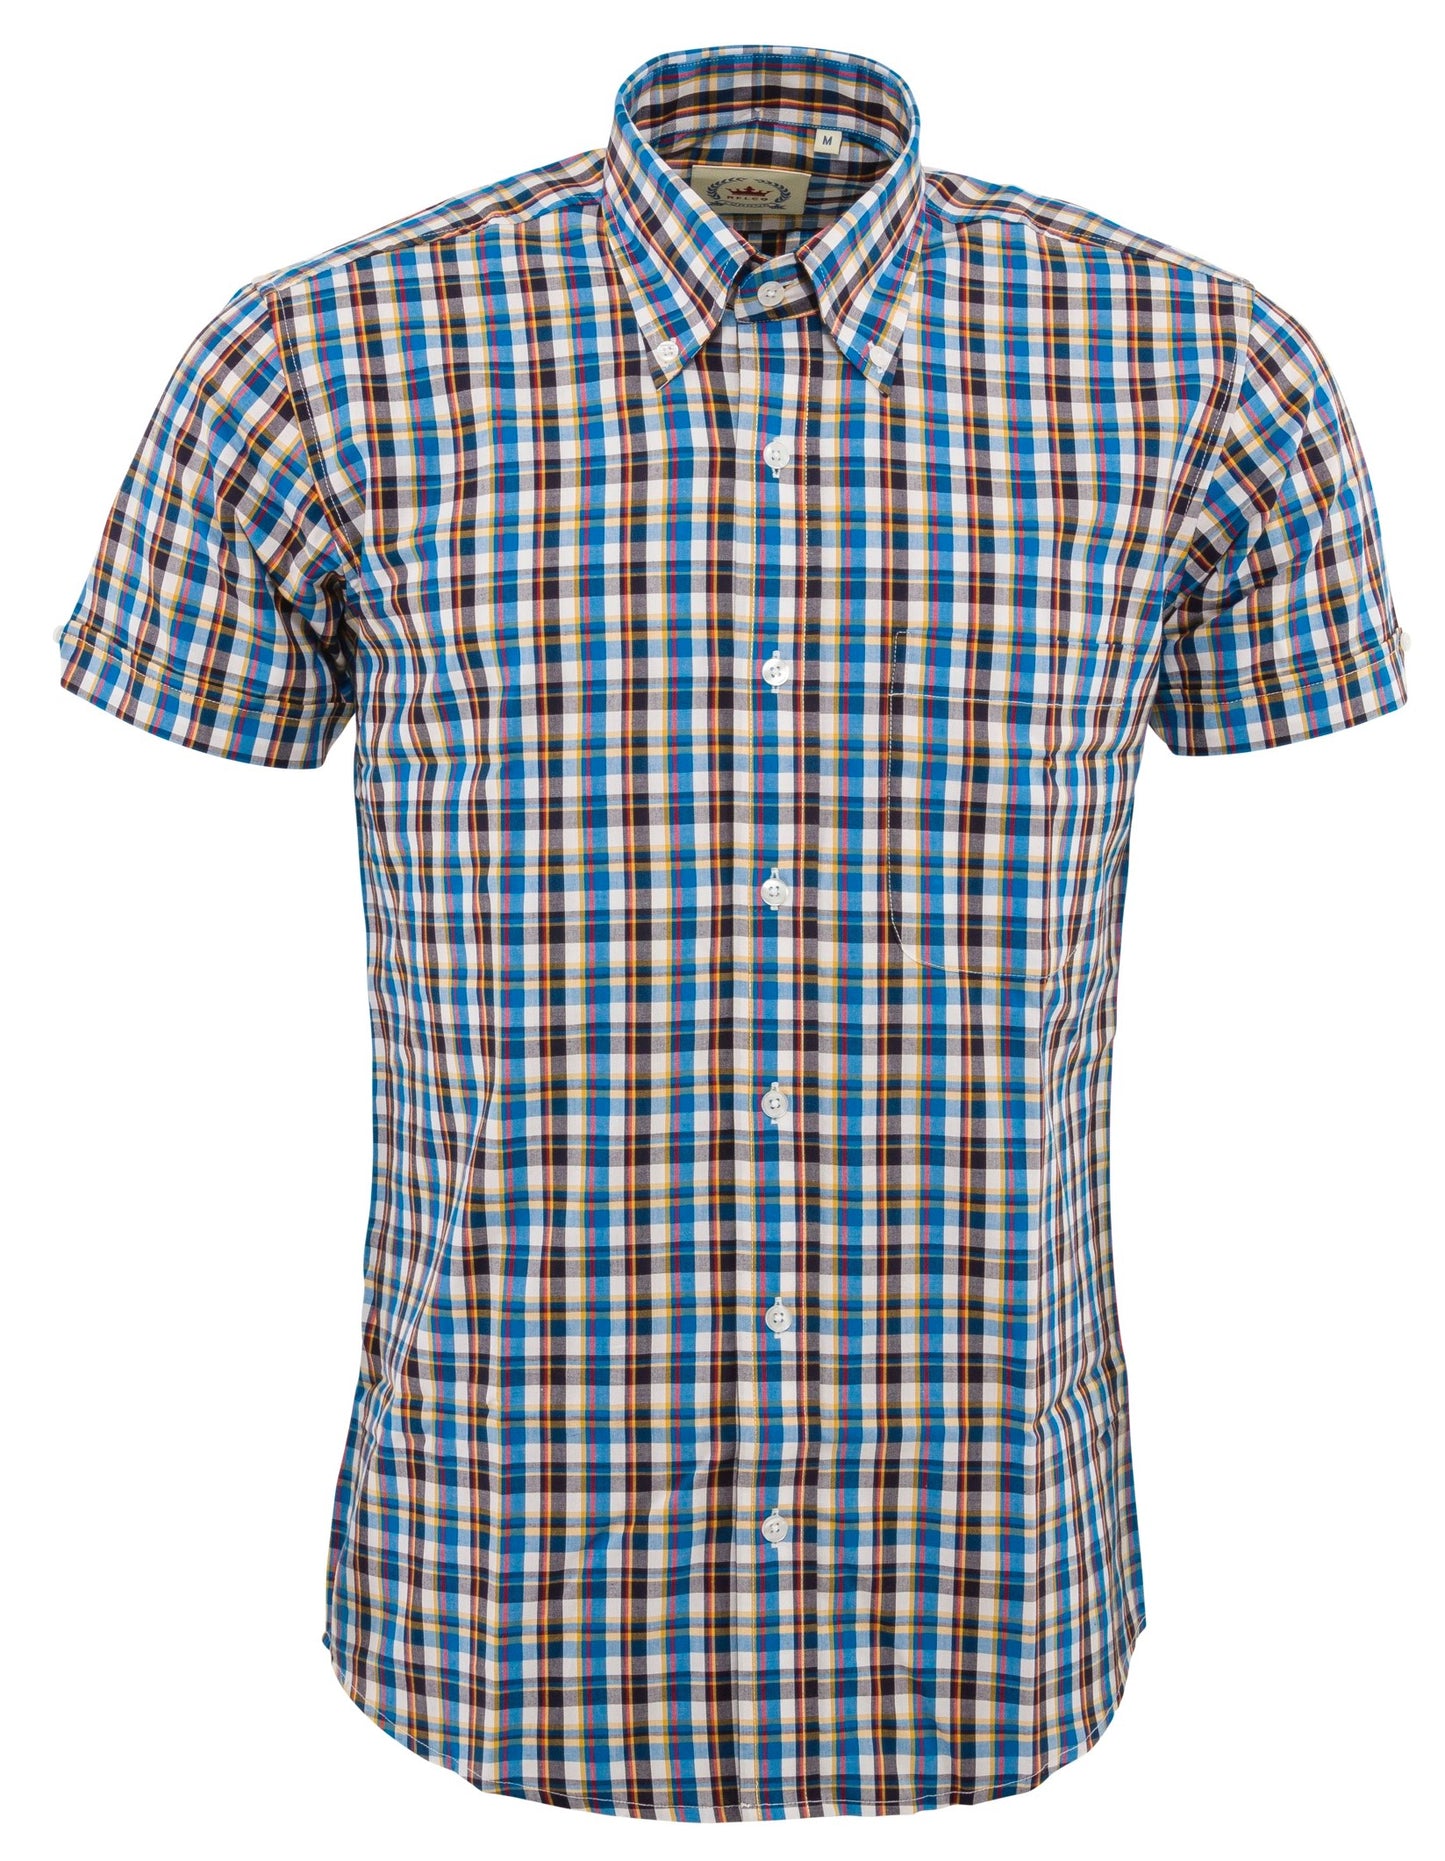 Relco Mens Multi Blue Checked Short Sleeved Button Down Shirts